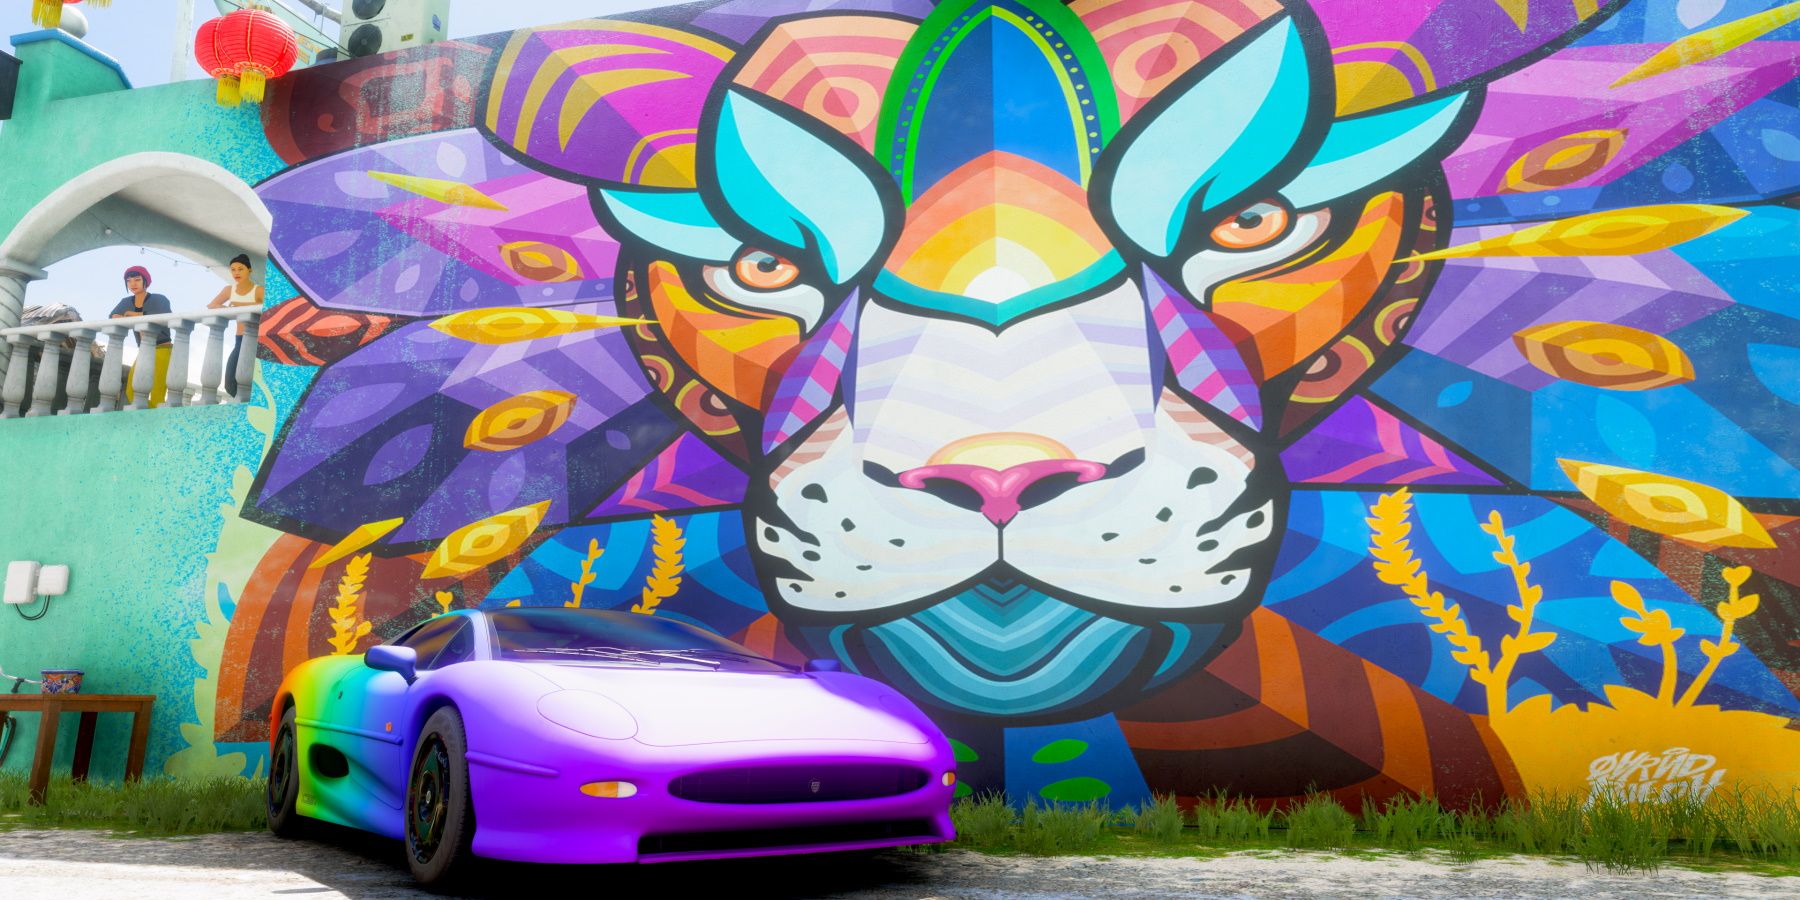 Forza Horizon 5 Jaguar in from of colorful mural